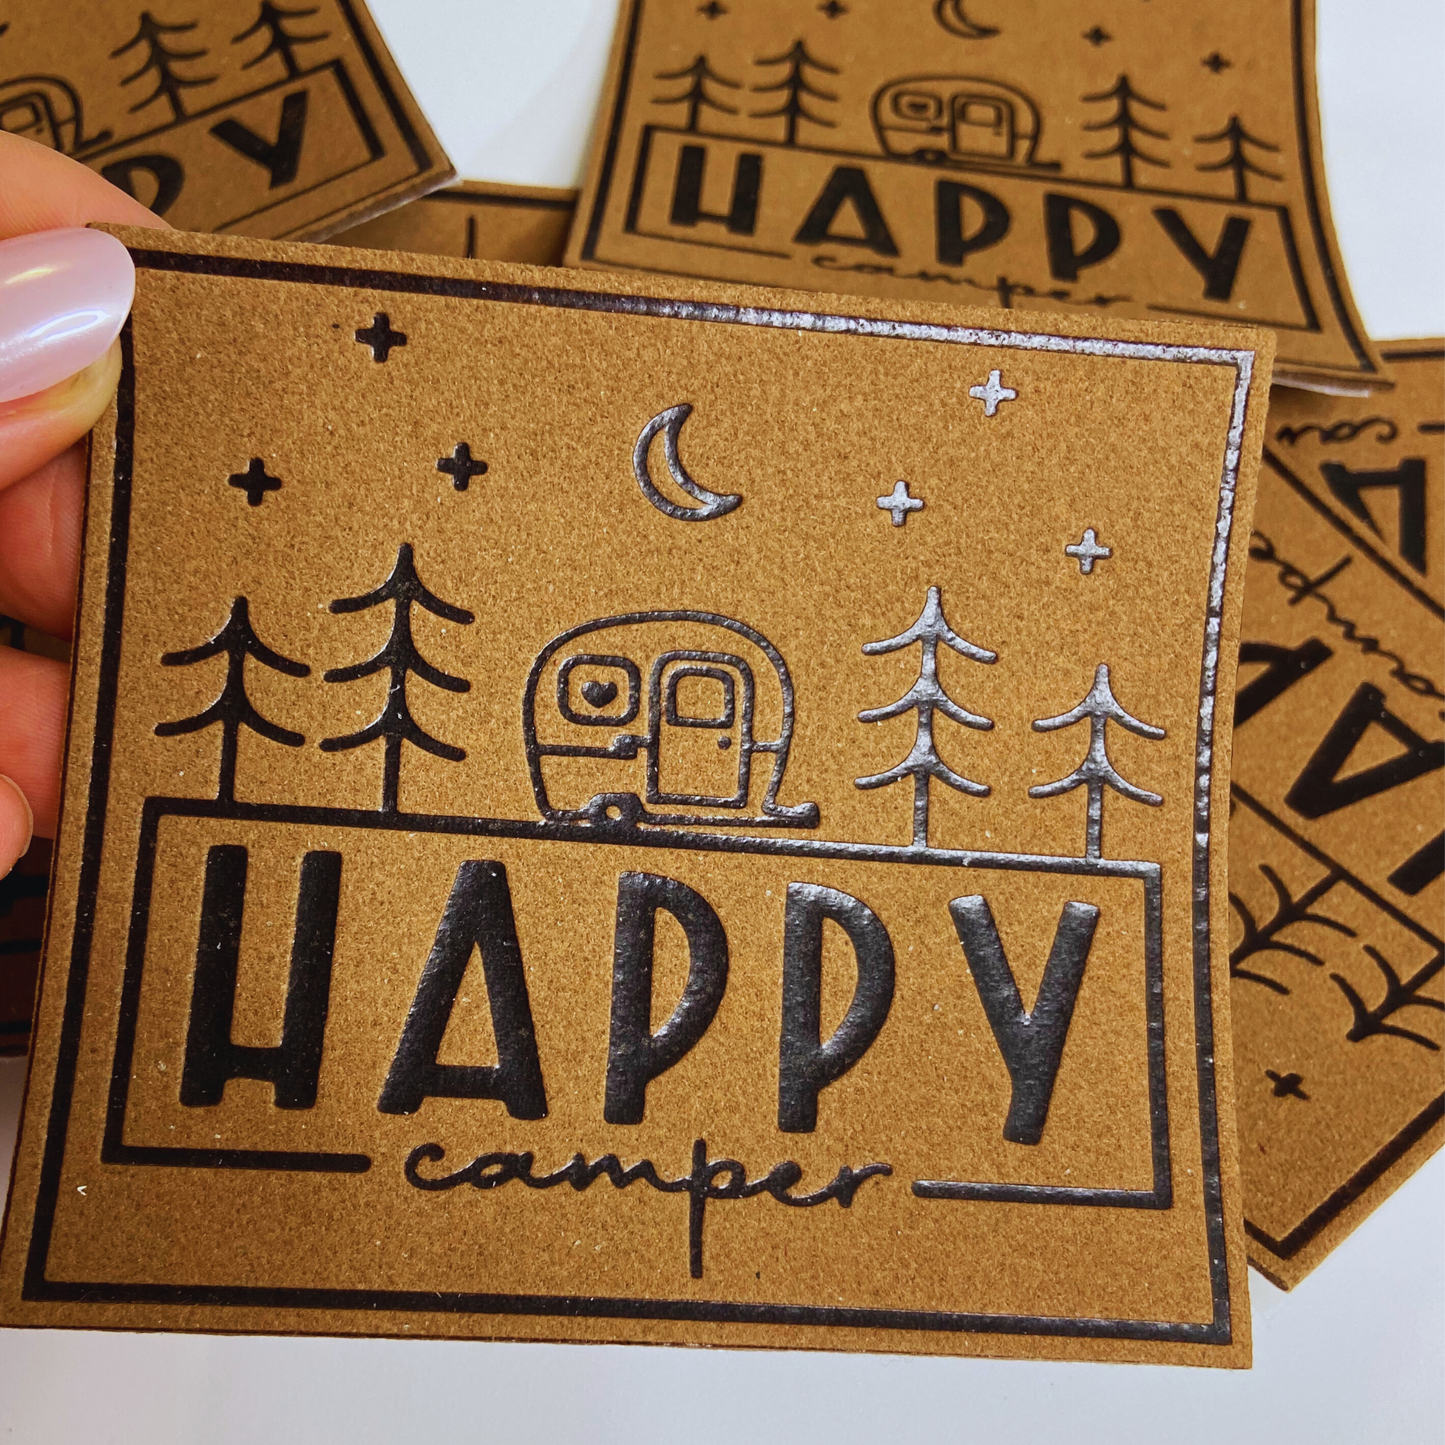 4" x 3.5" HAPPY Camper Patch - Hat Patch in Brown